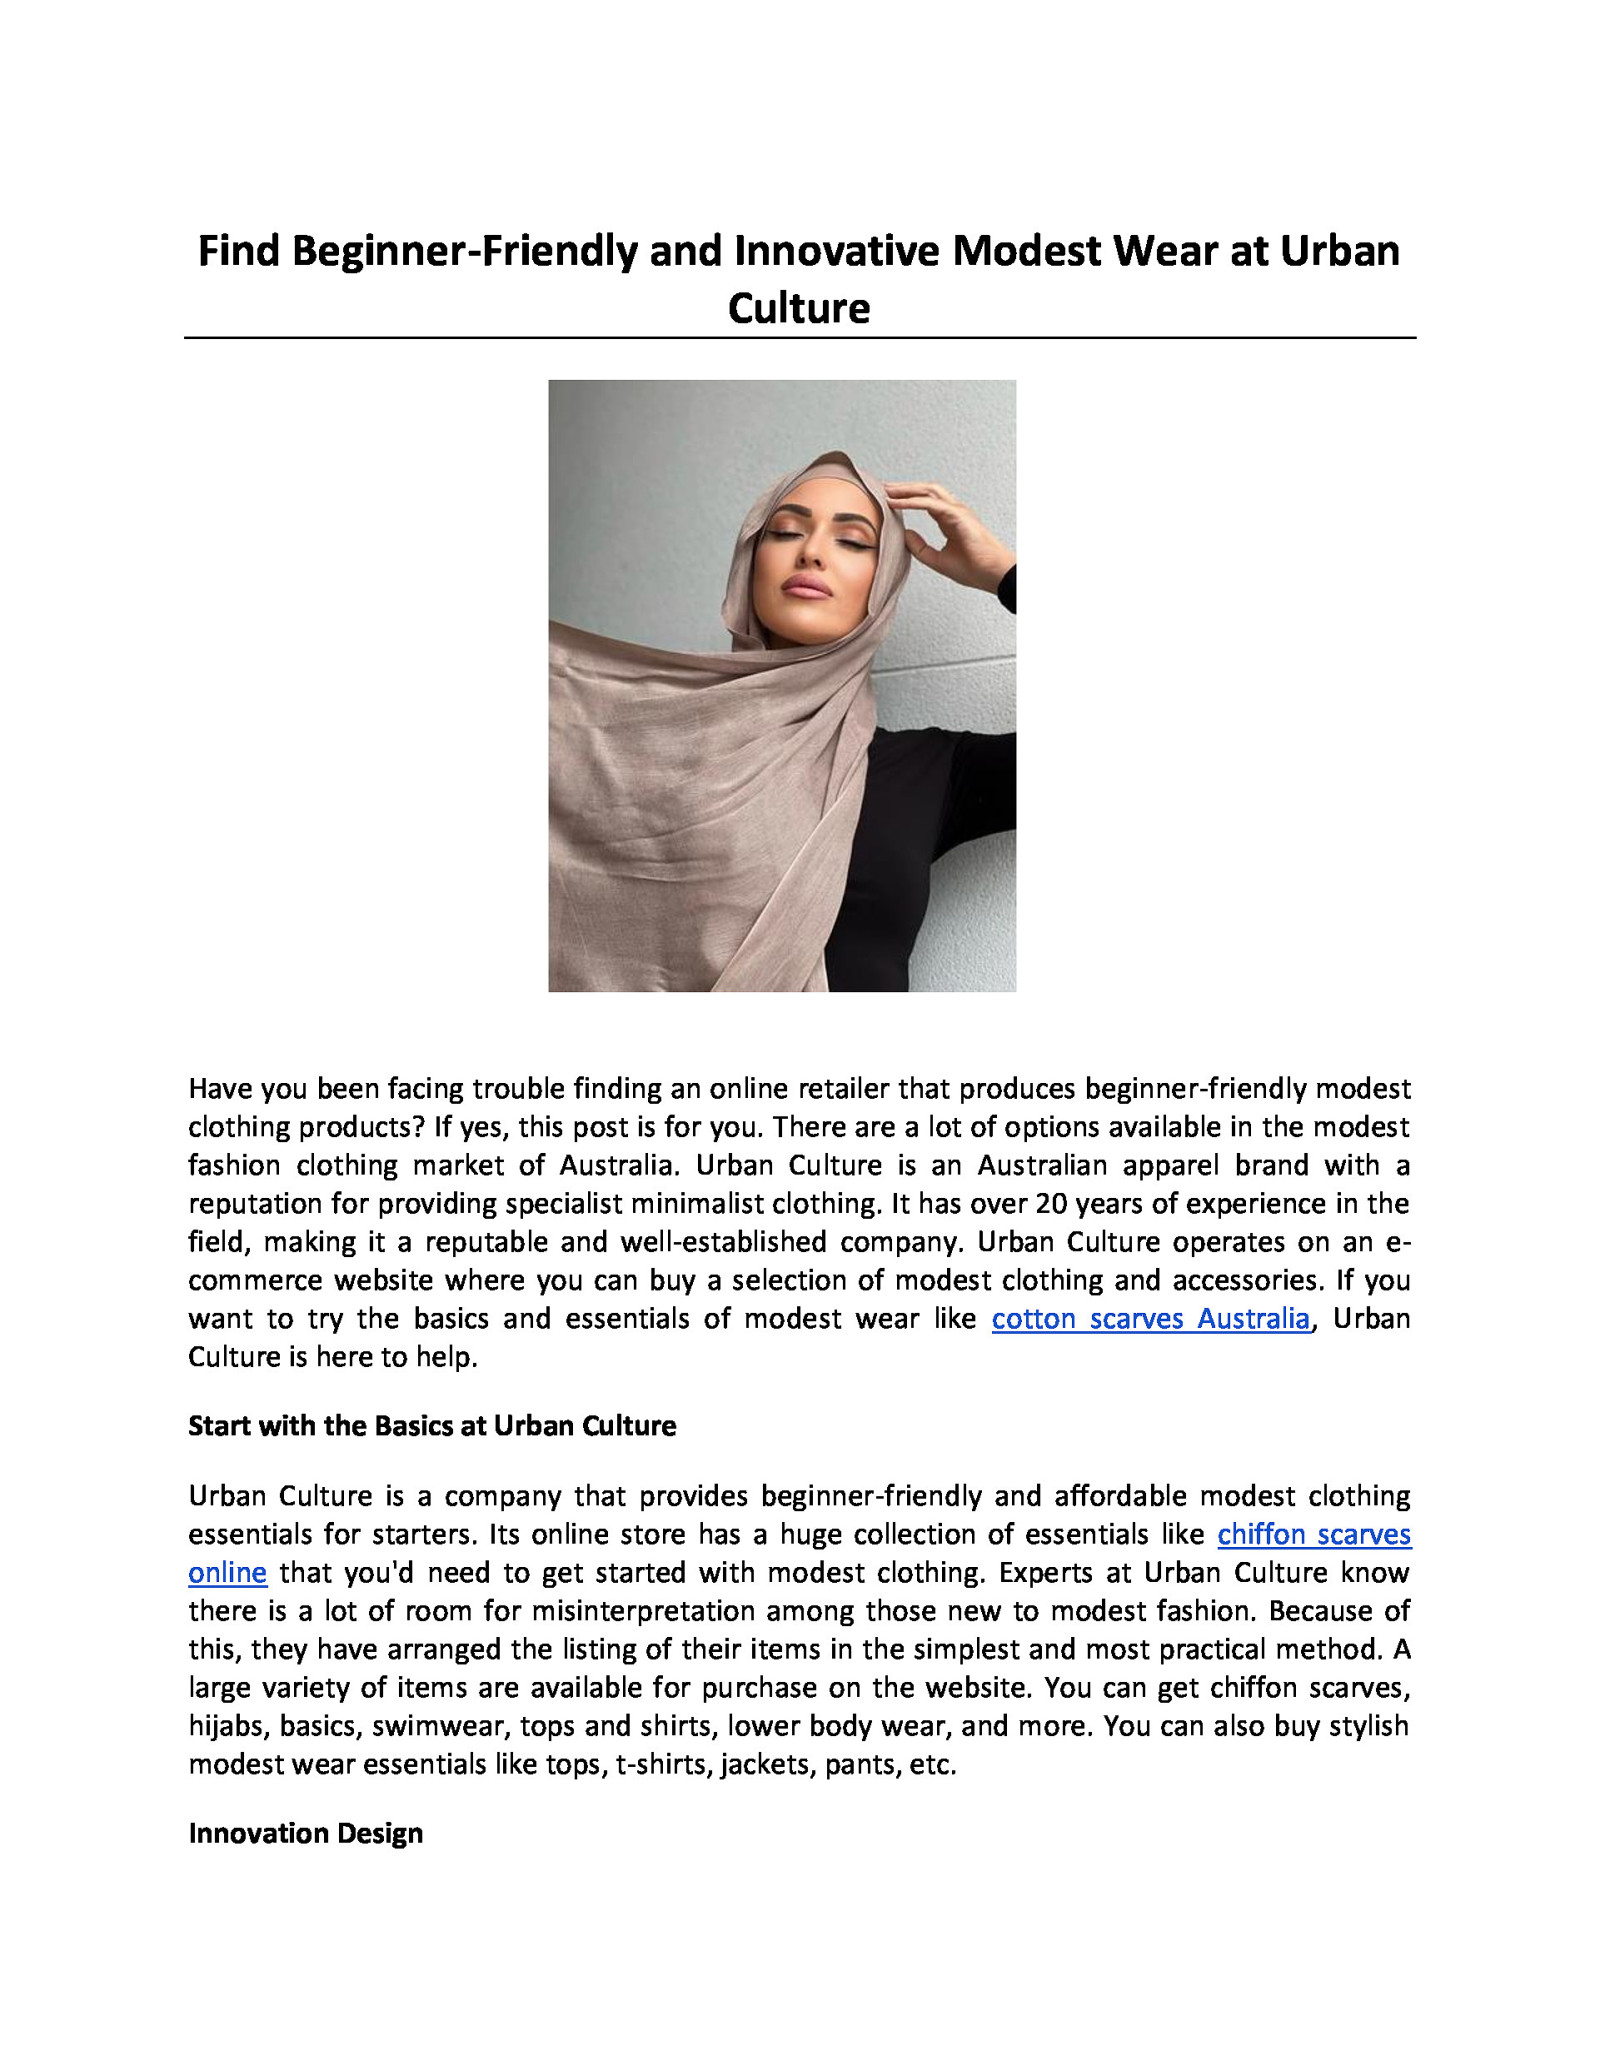 Find Beginner-Friendly and Innovative Modest Wear at Urban Culture